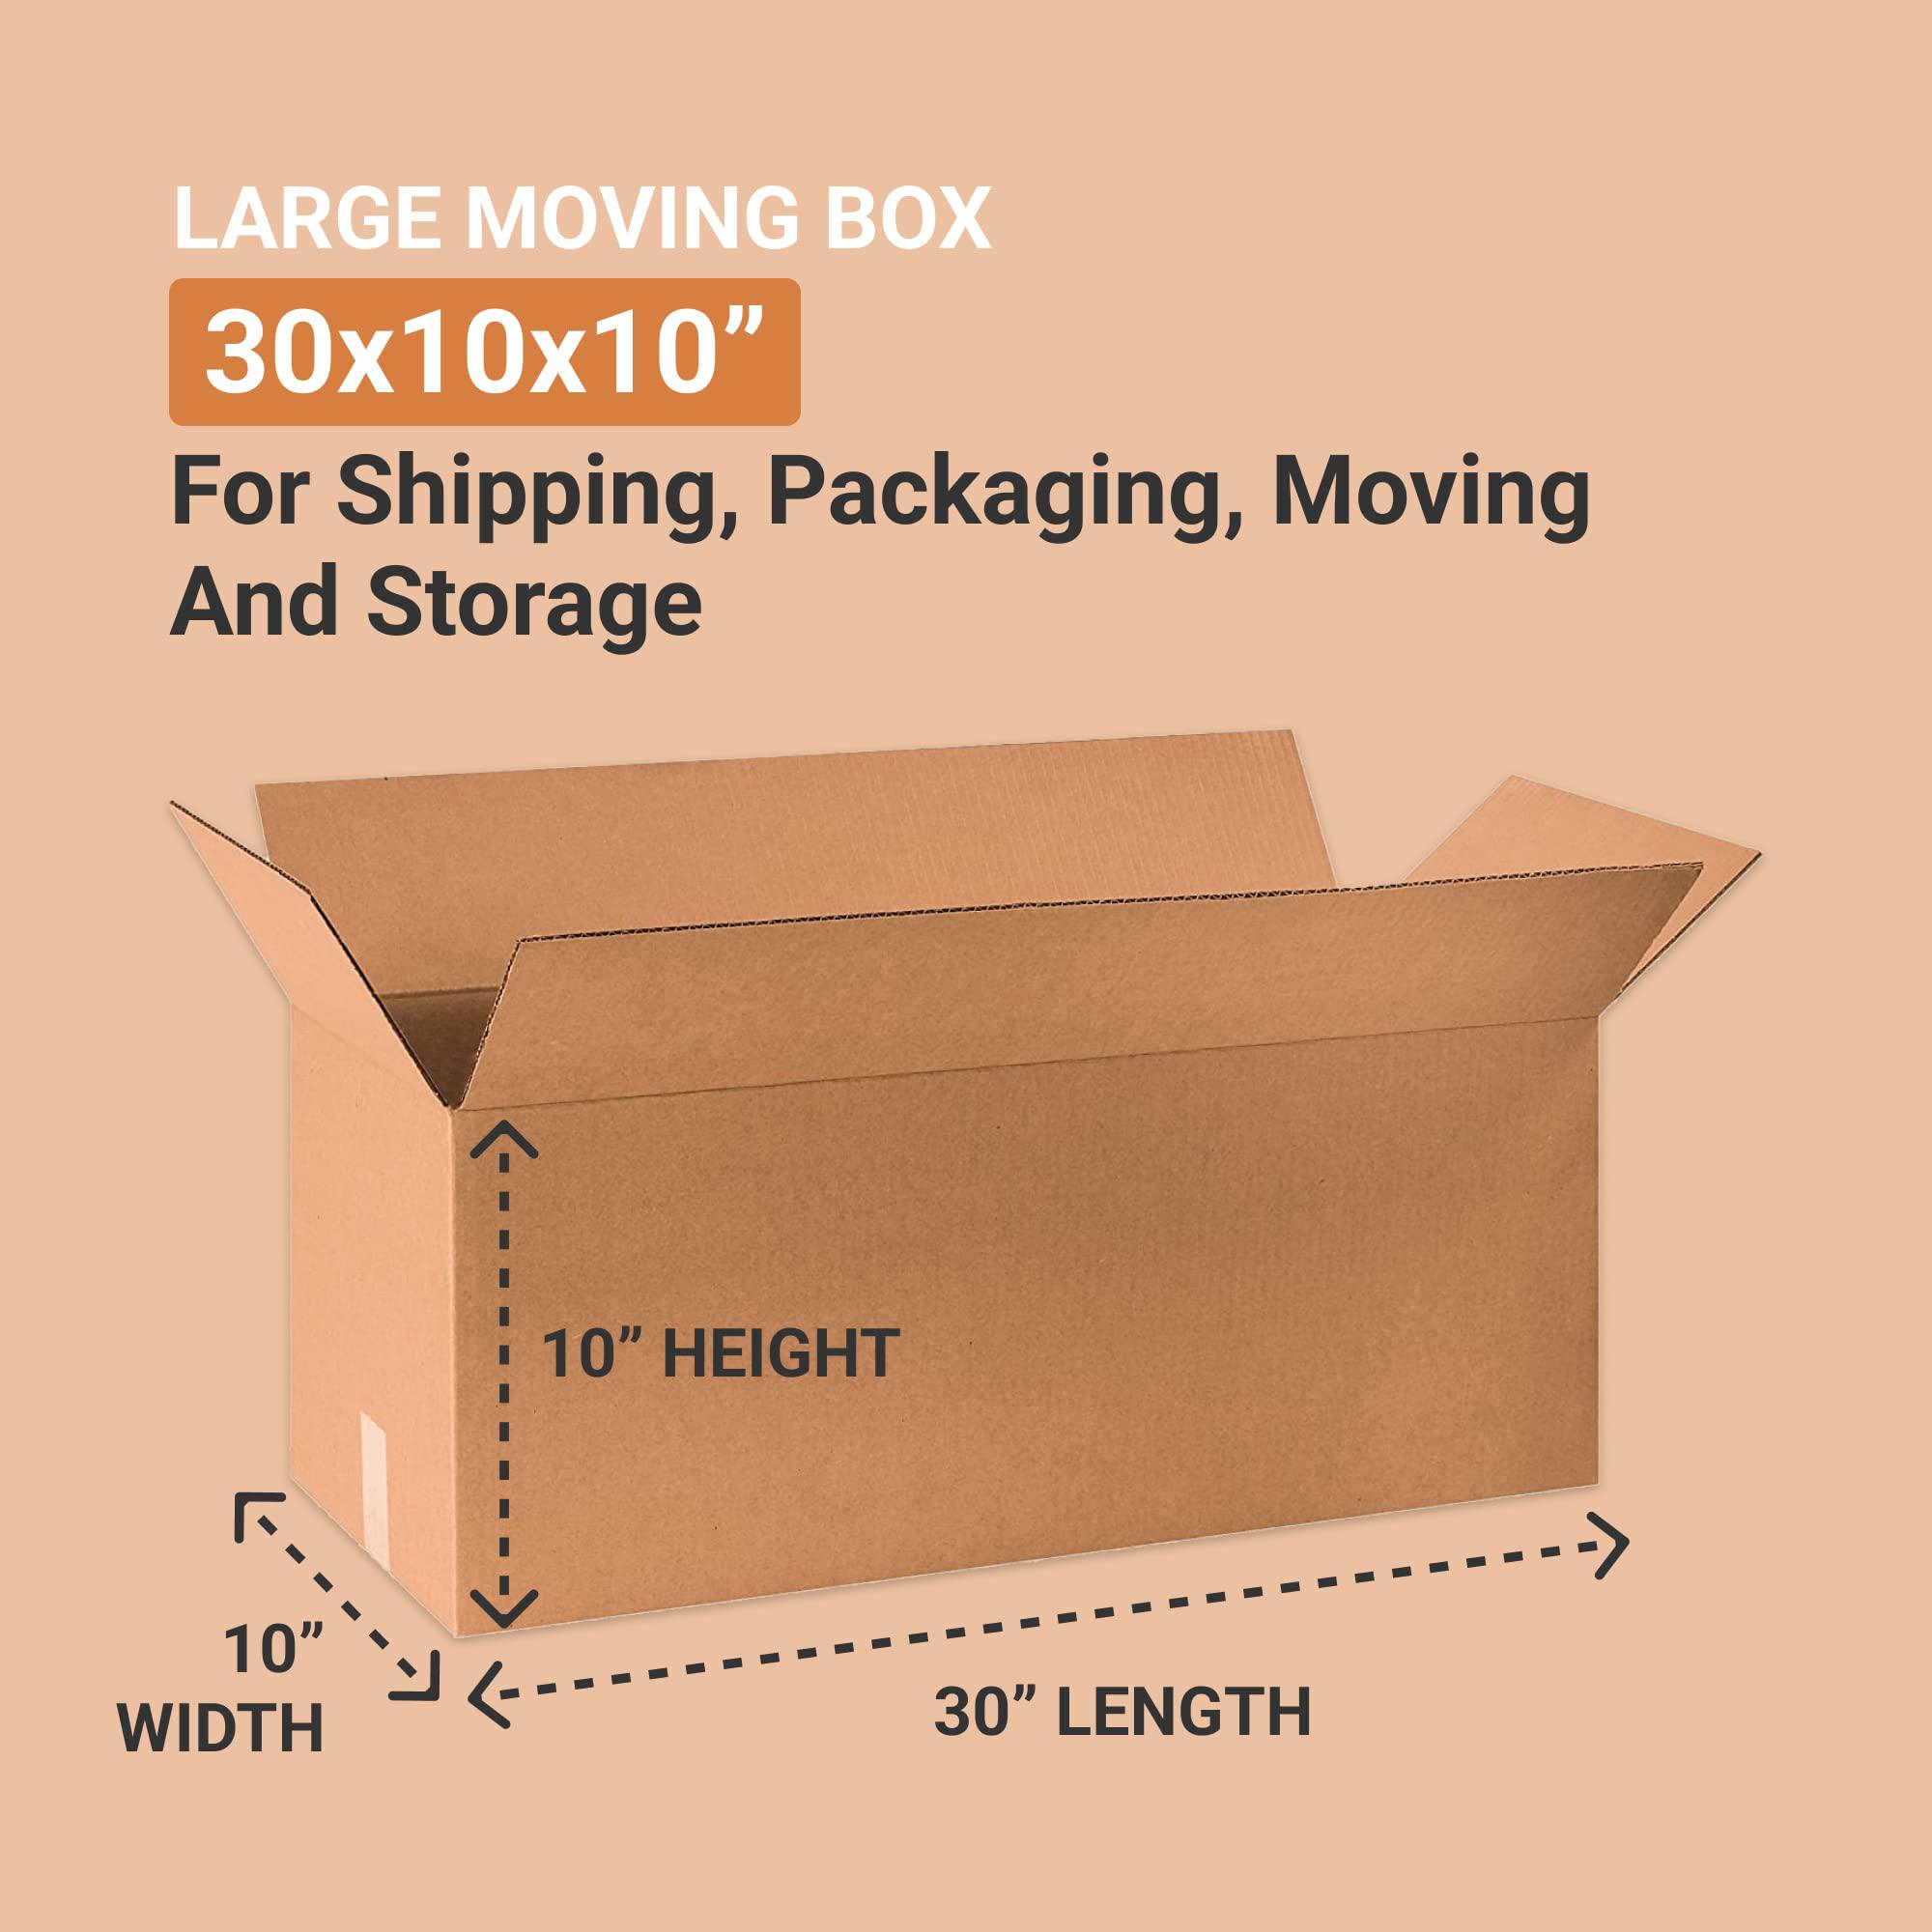 aviditi shipping boxeslarge 30"l x 10"w x 10"h , 20-pack | corrugated cardboard box for packing, moving and storage30x10x10 3